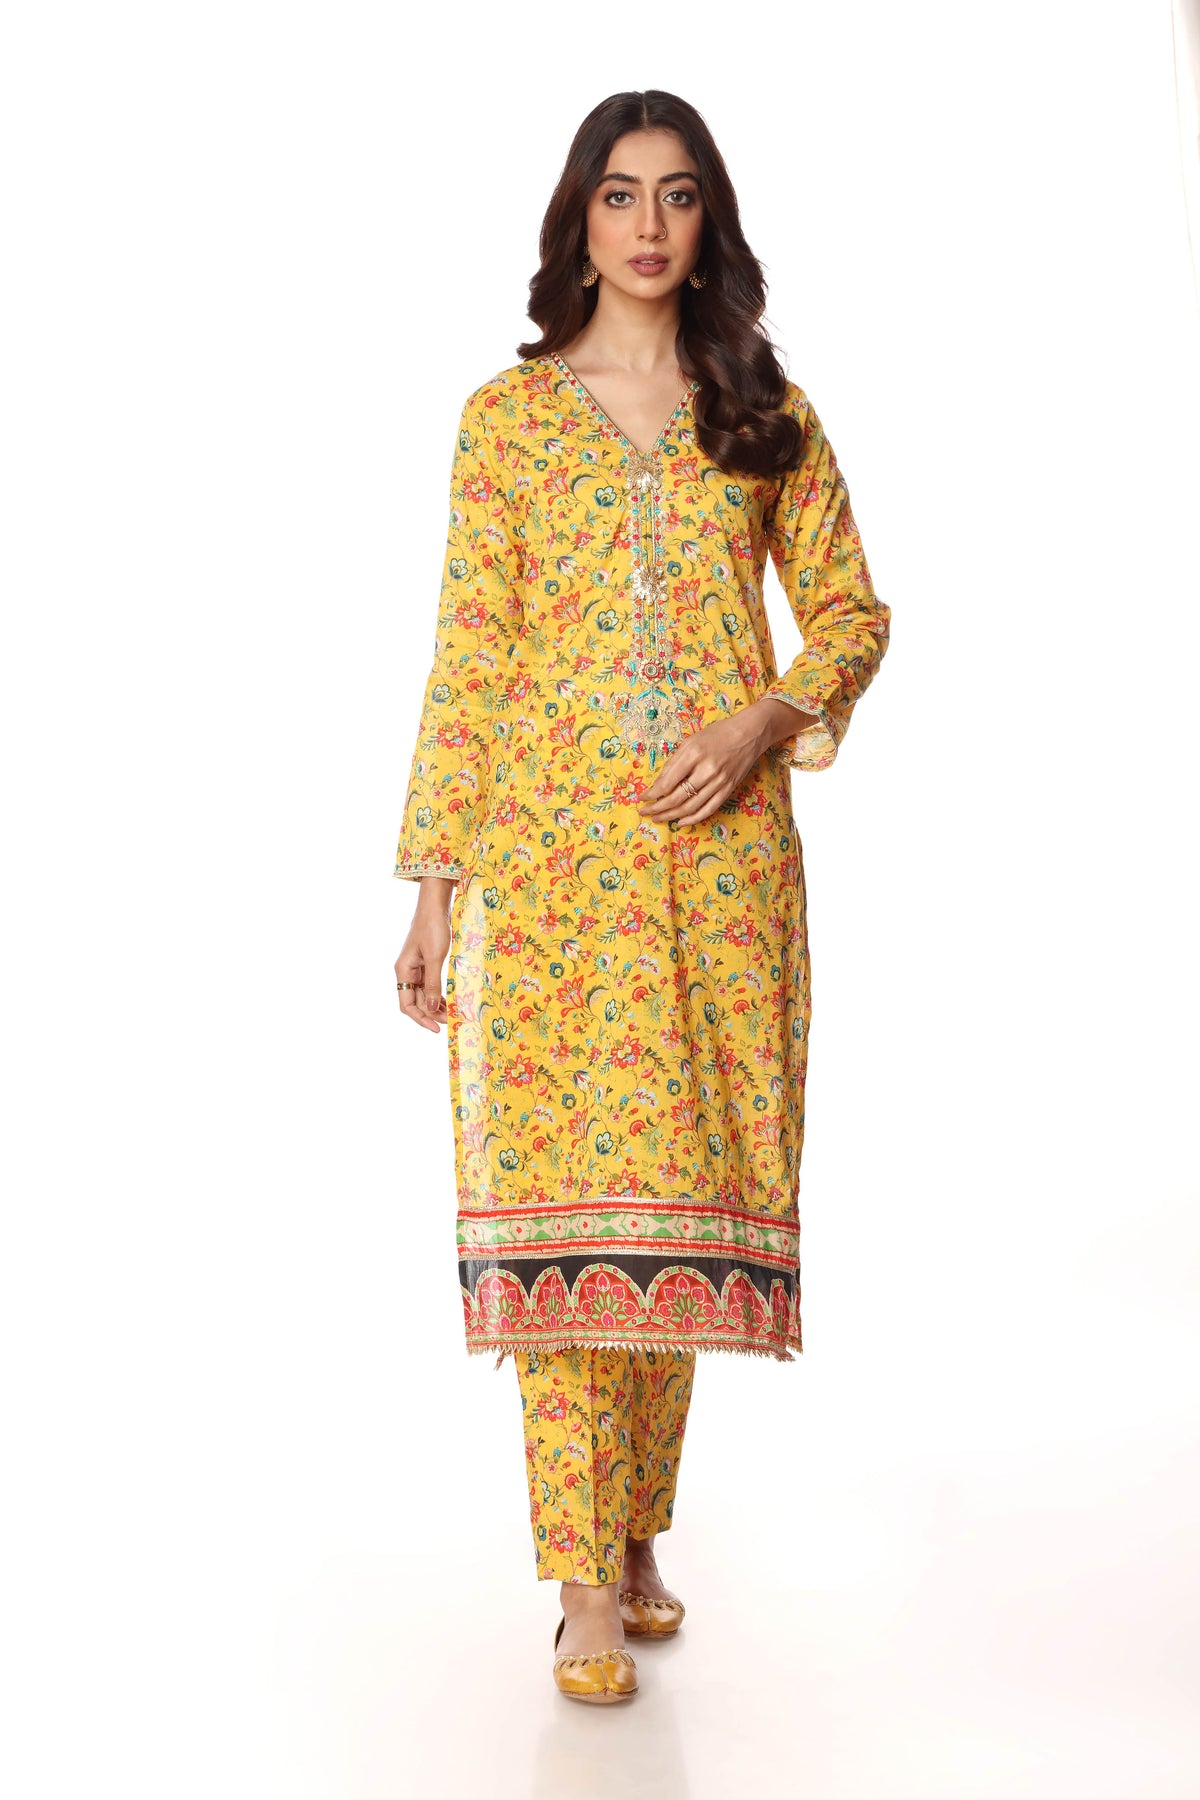 Mustard Wave Ll in Multi coloured Printed Lawn fabric